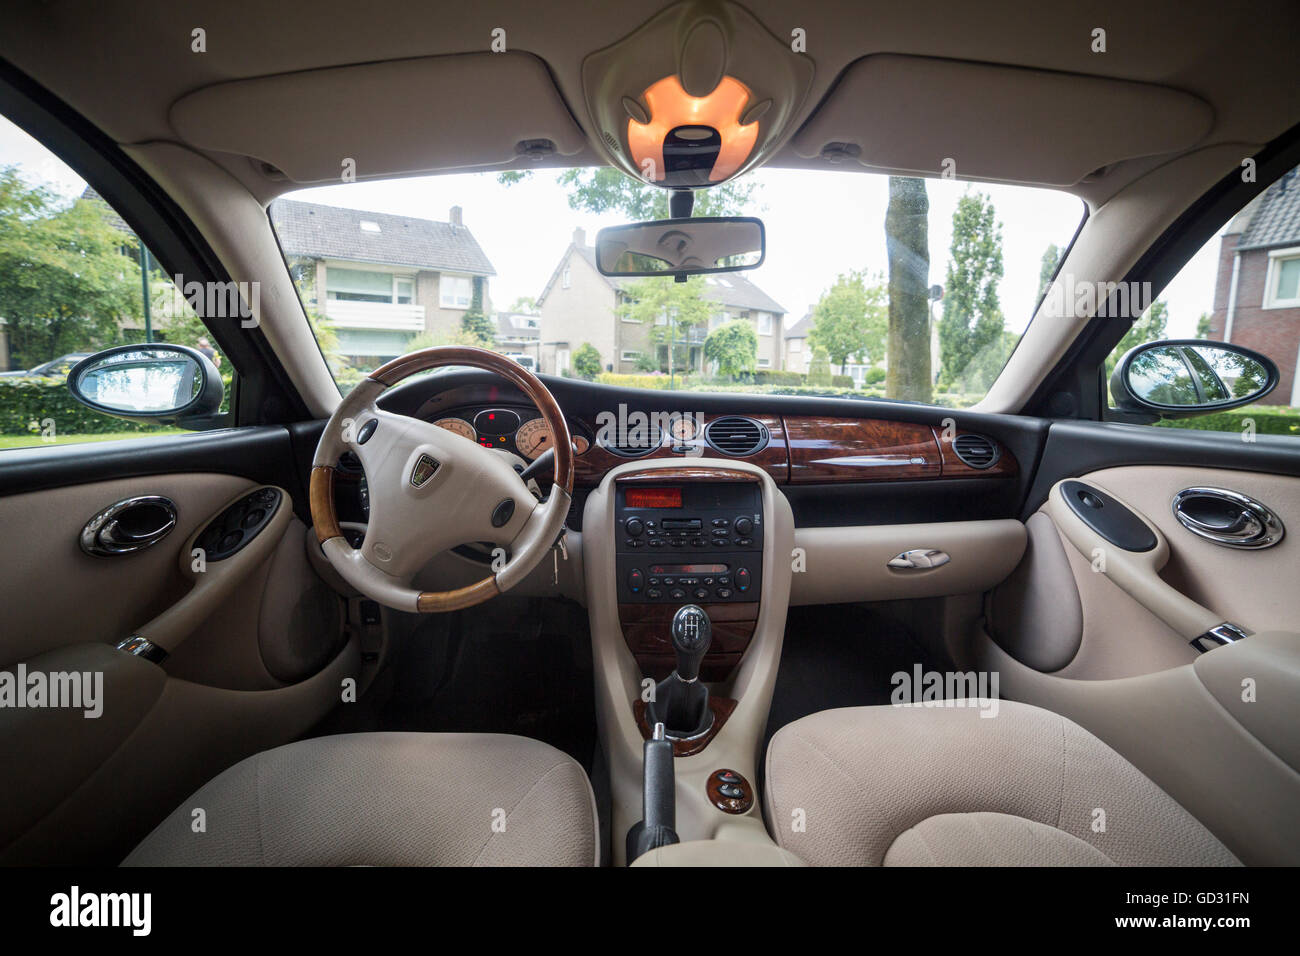 Rover 75 car interior color green with a walnut dashboard Stock Photo